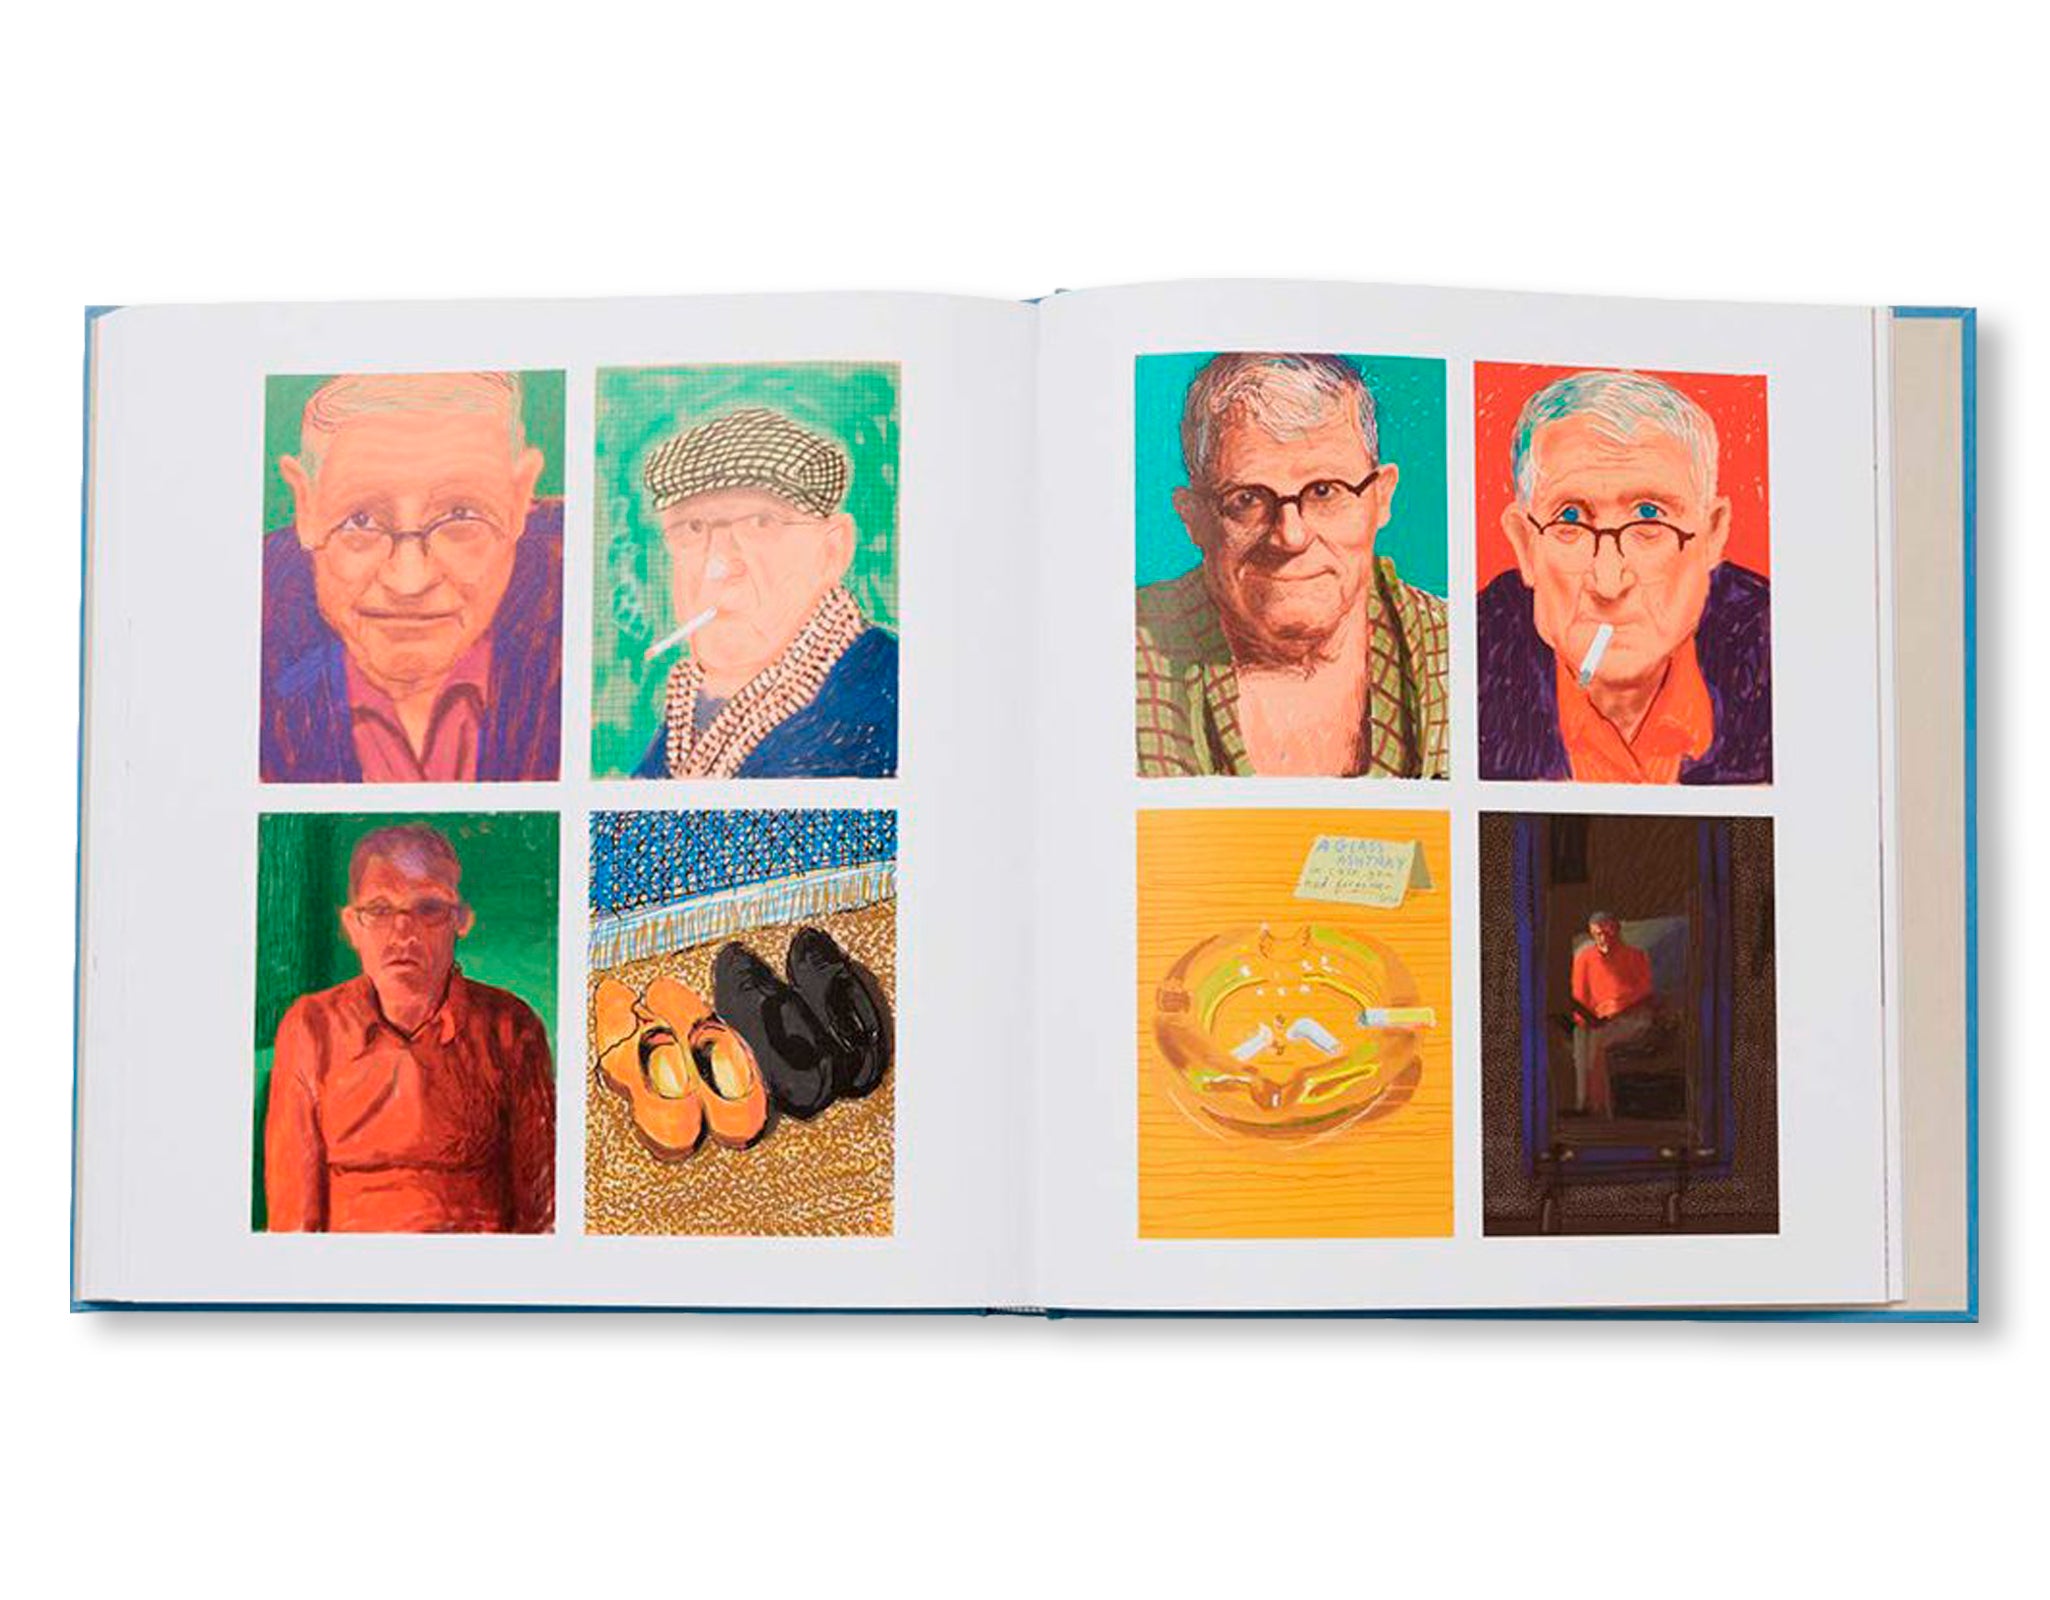 DRAWING FROM LIFE by David Hockney